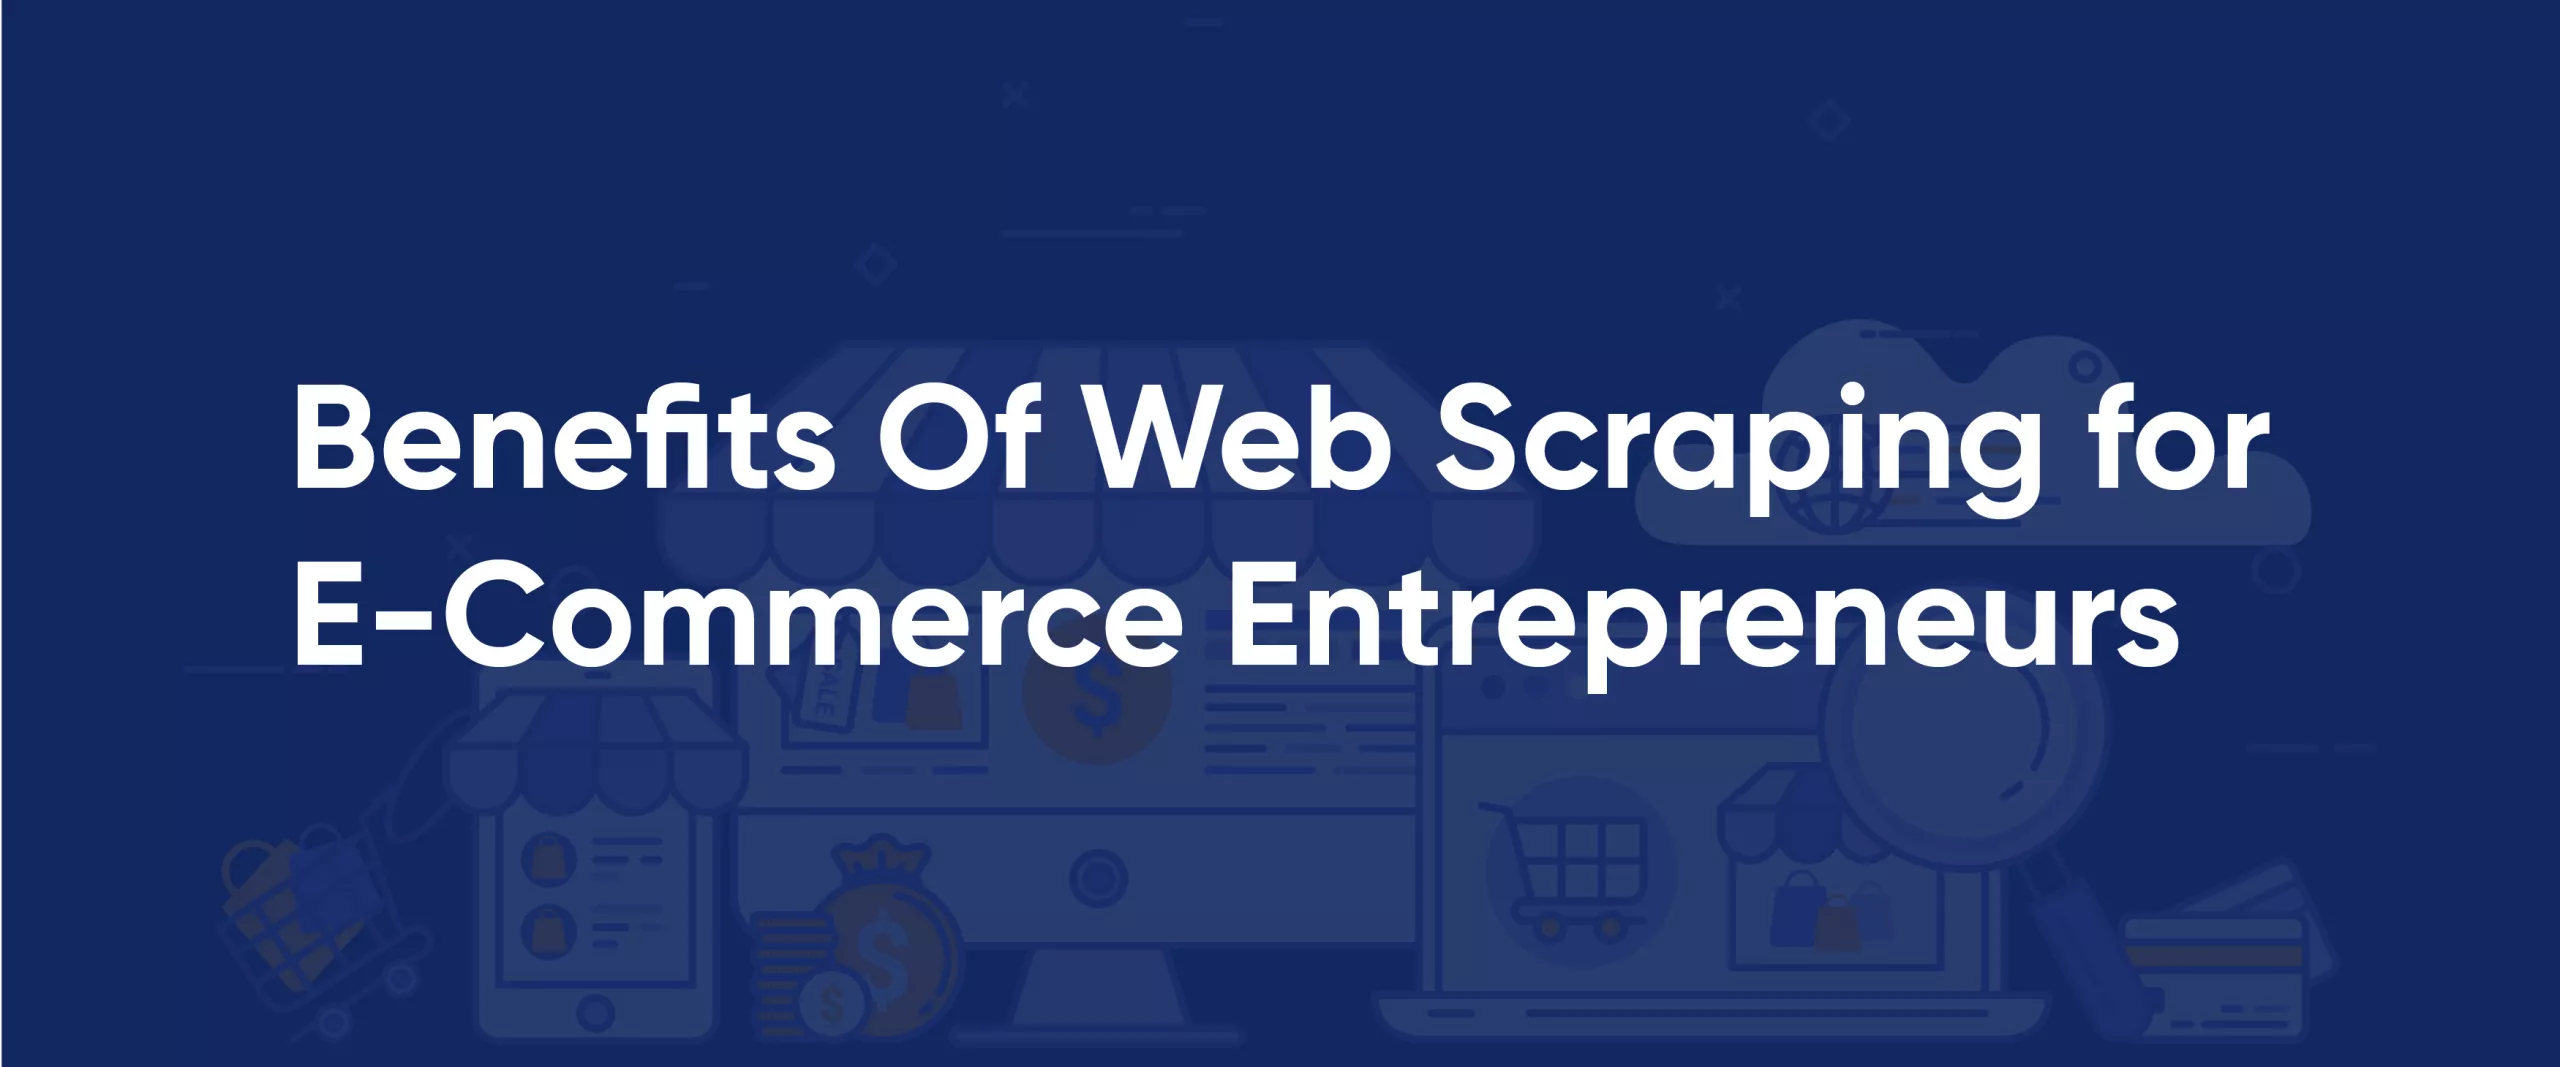 How to Use Web Scraping in E-Commerce for Strategic Marketing & Advertising Decisions